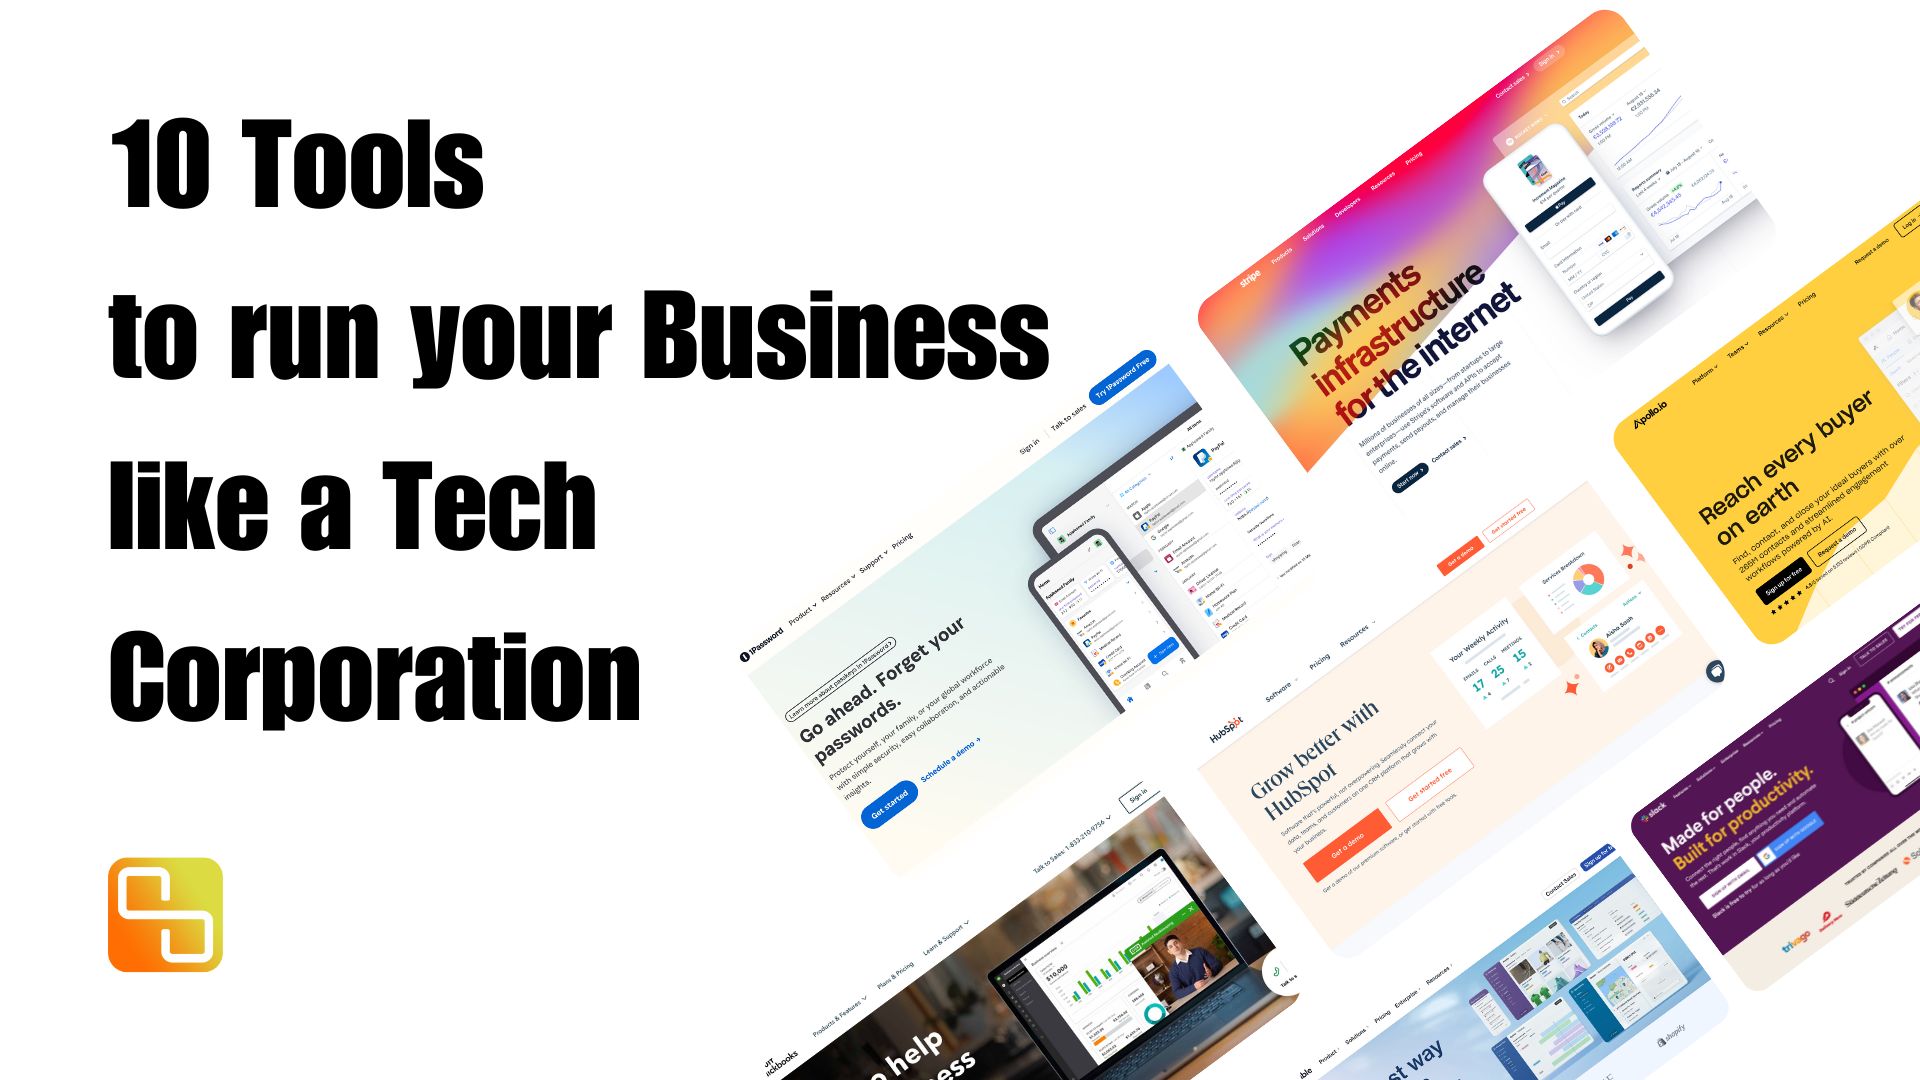 10 tools to run your Small Business like a Tech Corporation